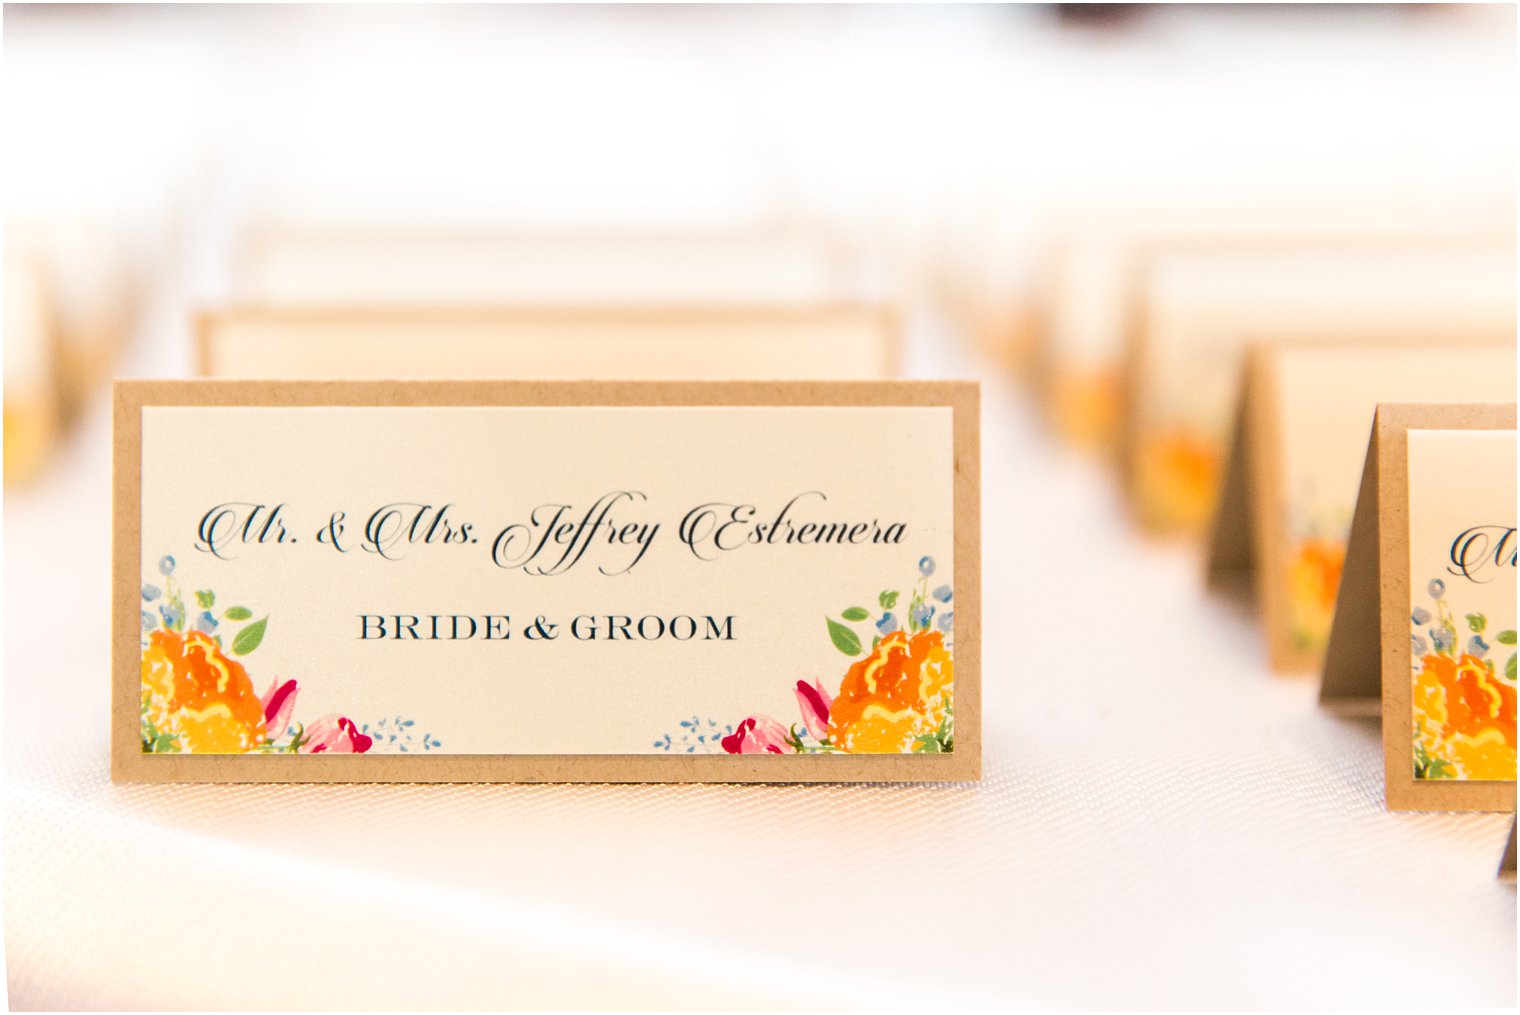 Seating cards by Holland Designs